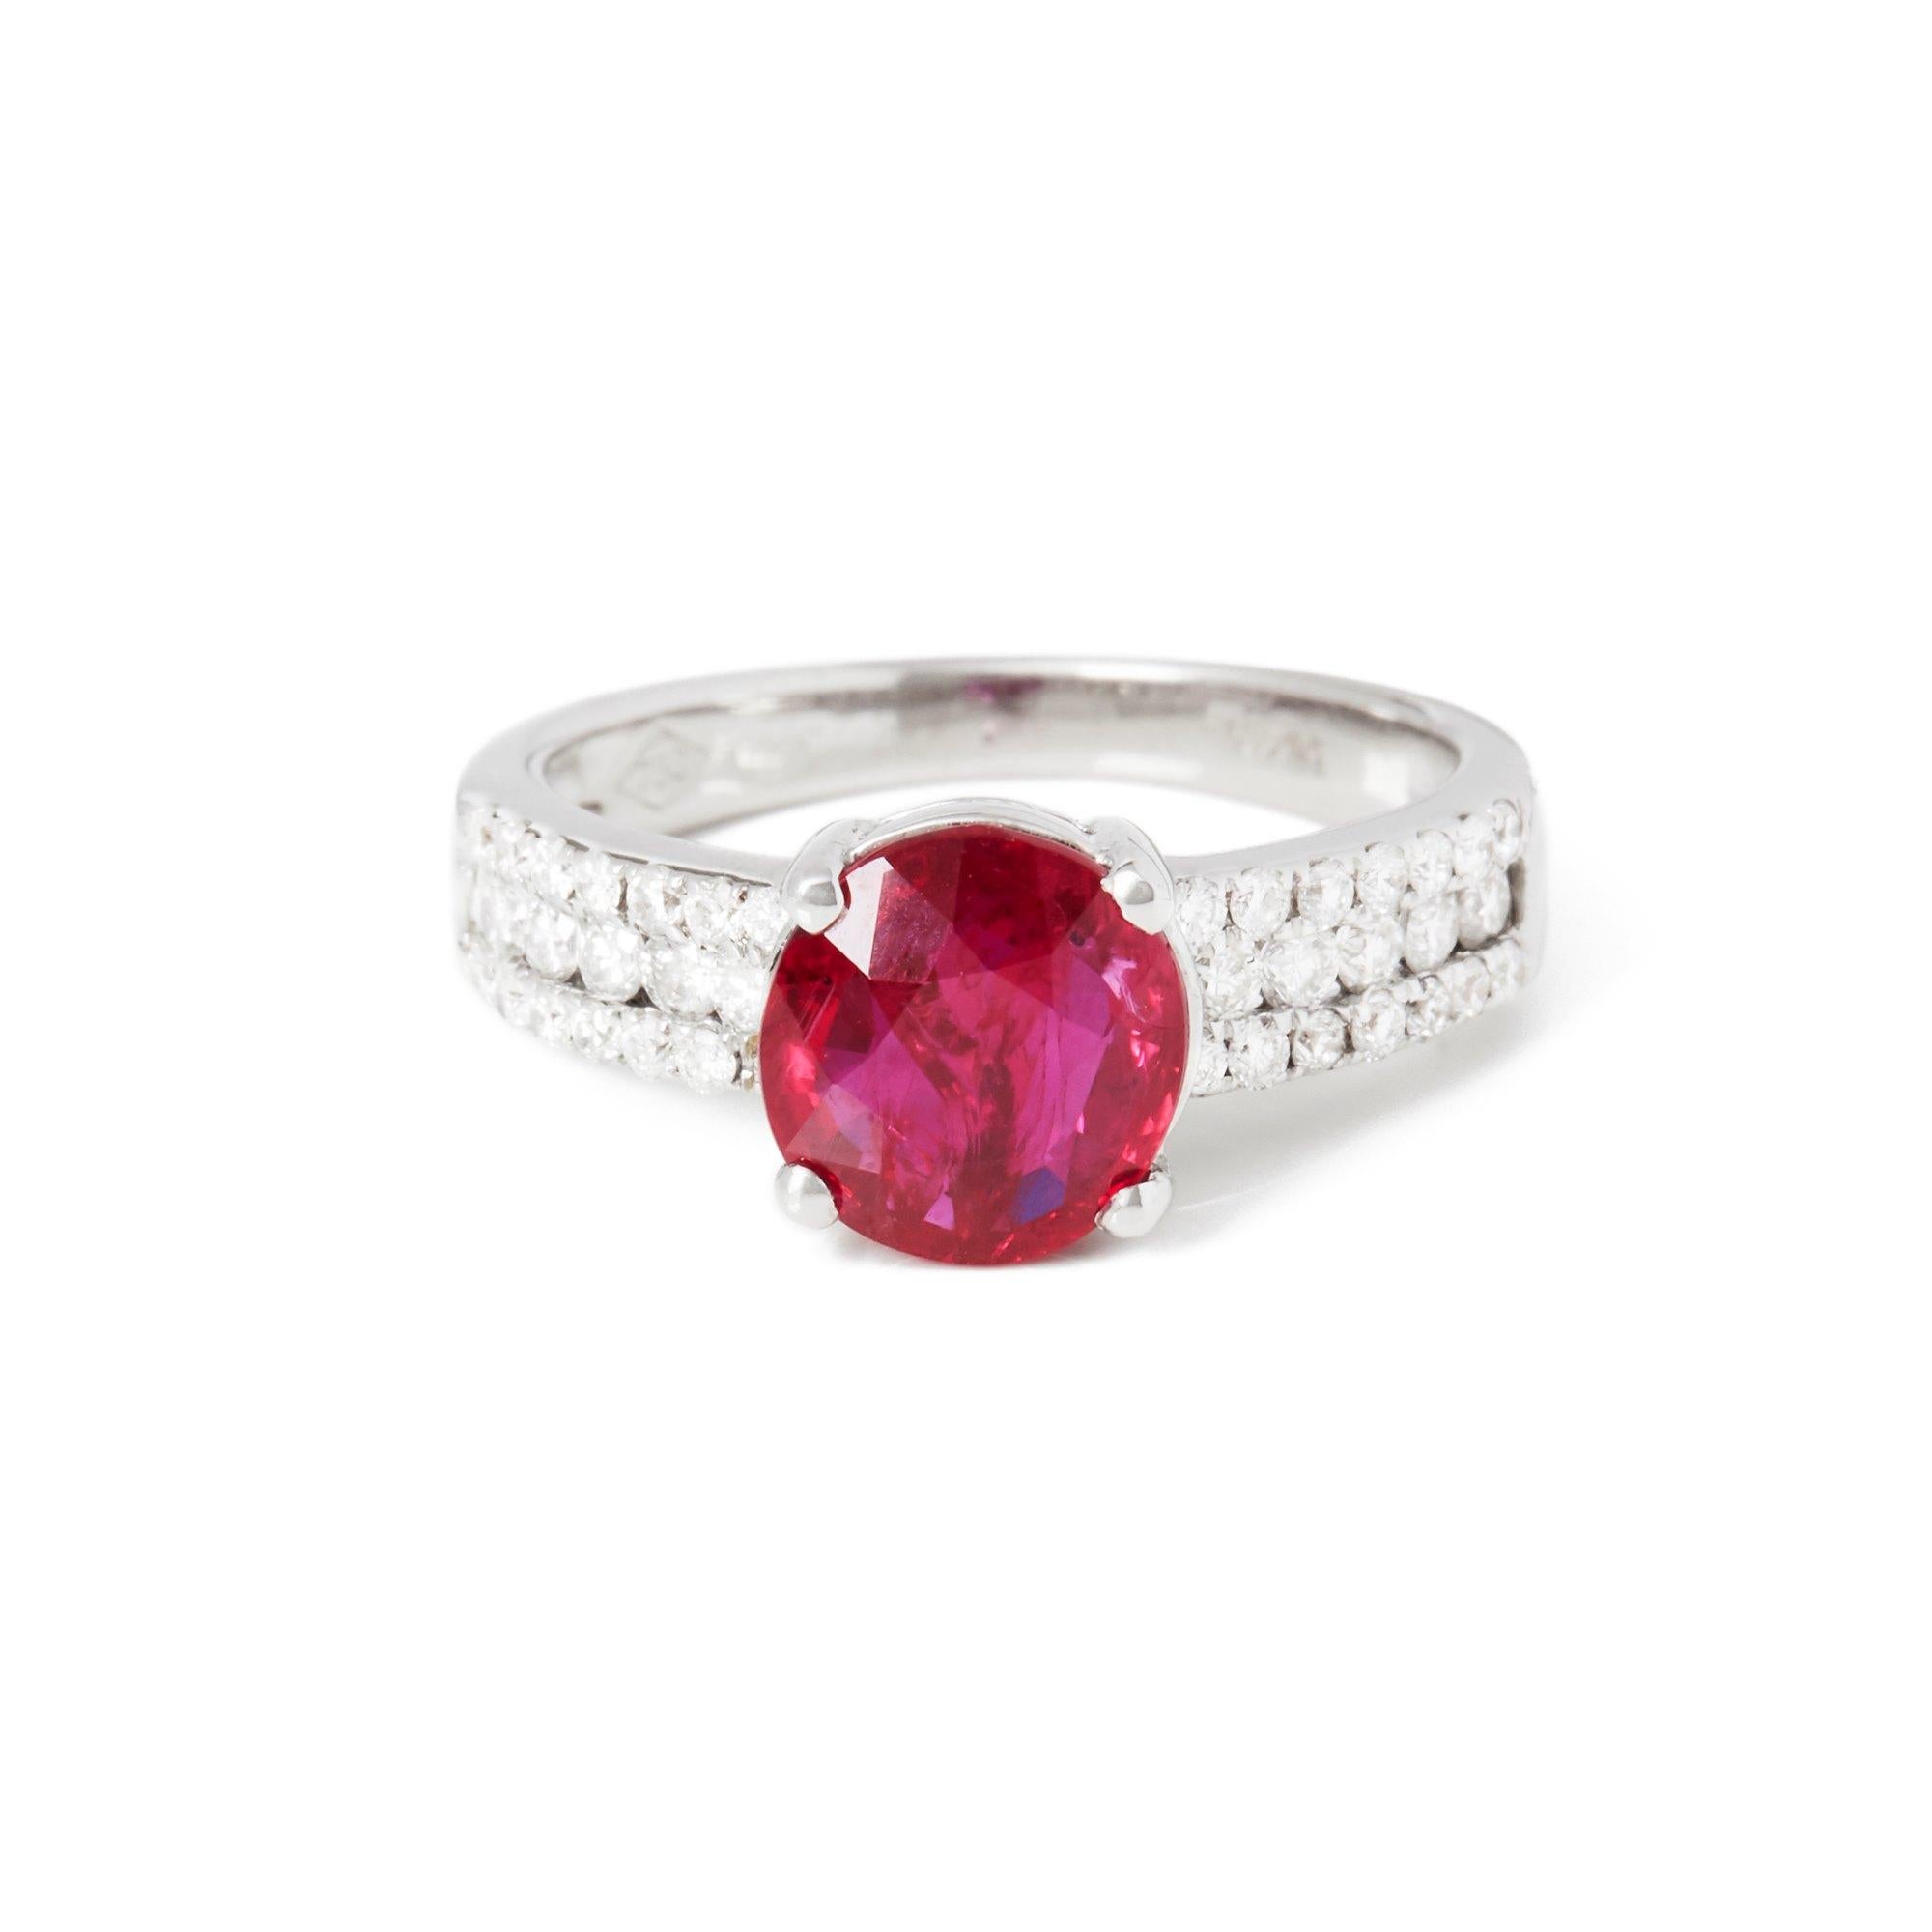 This ring designed by David Jerome is from his private collection and features one oval cut Ruby totalling 2.03cts sourced in Mozambique. Set with round brilliant cut Diamonds totalling 0.44cts mounted in an 18k white gold setting. UK finger size K